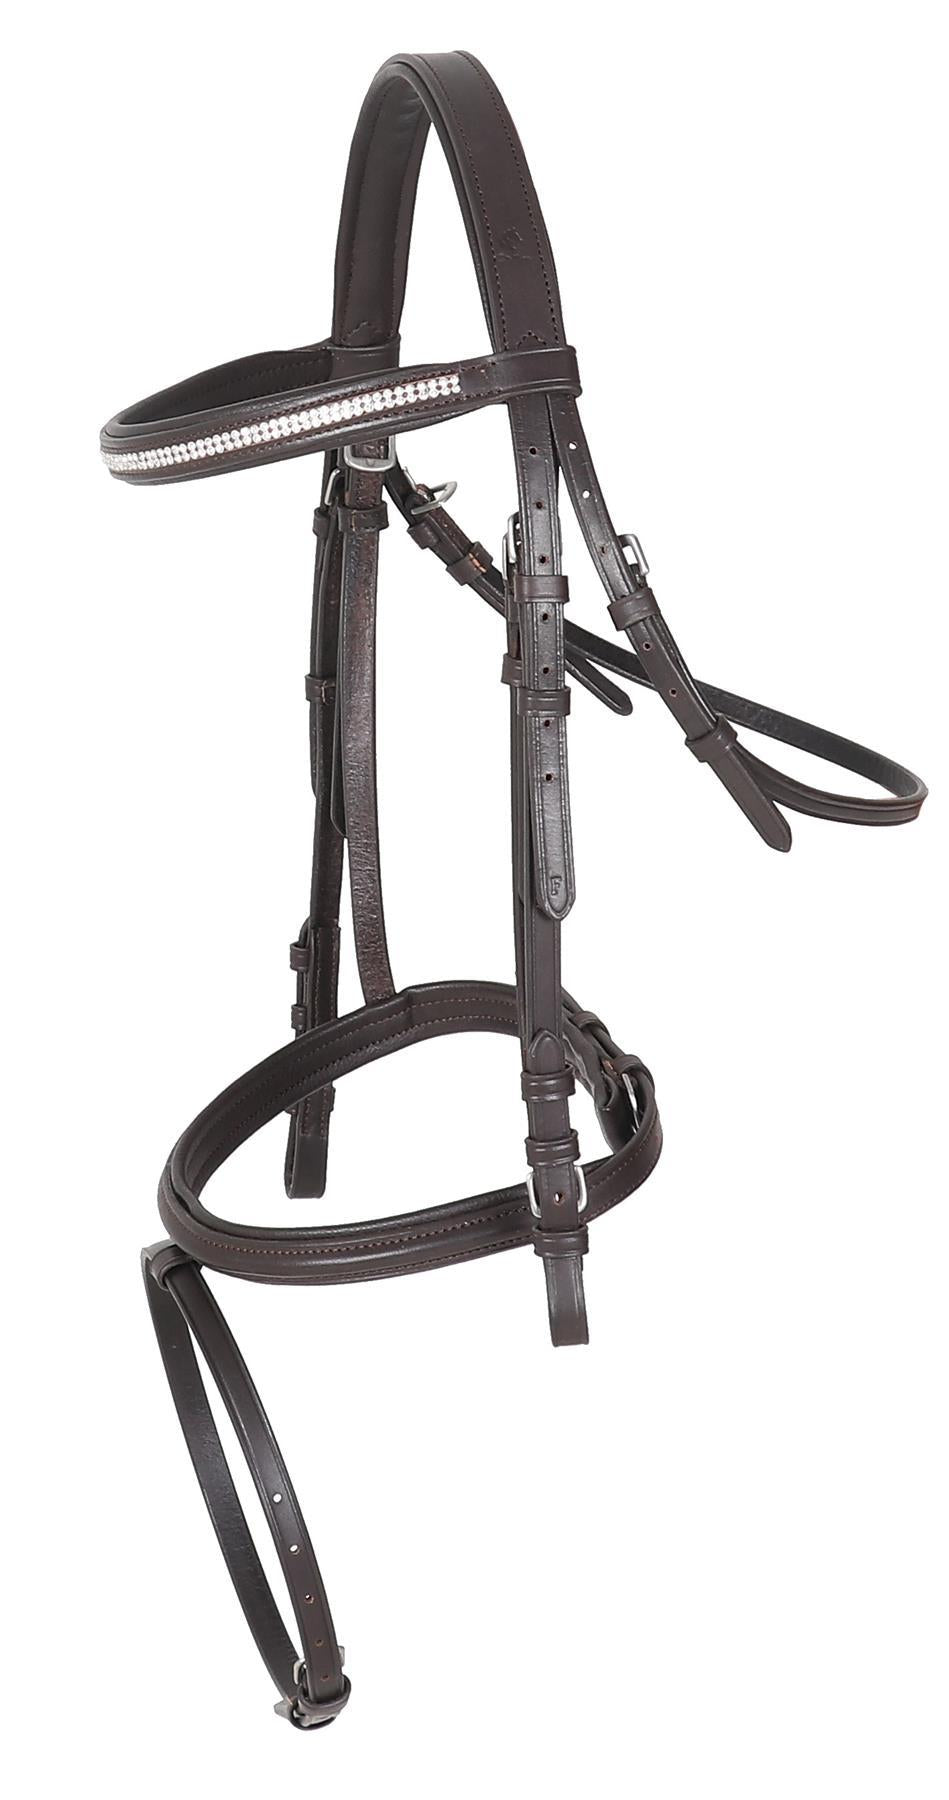 Leather Padded Horse Bridle with FREE Reins Flash Noseband Black Brown 4 Sizes - Tack24